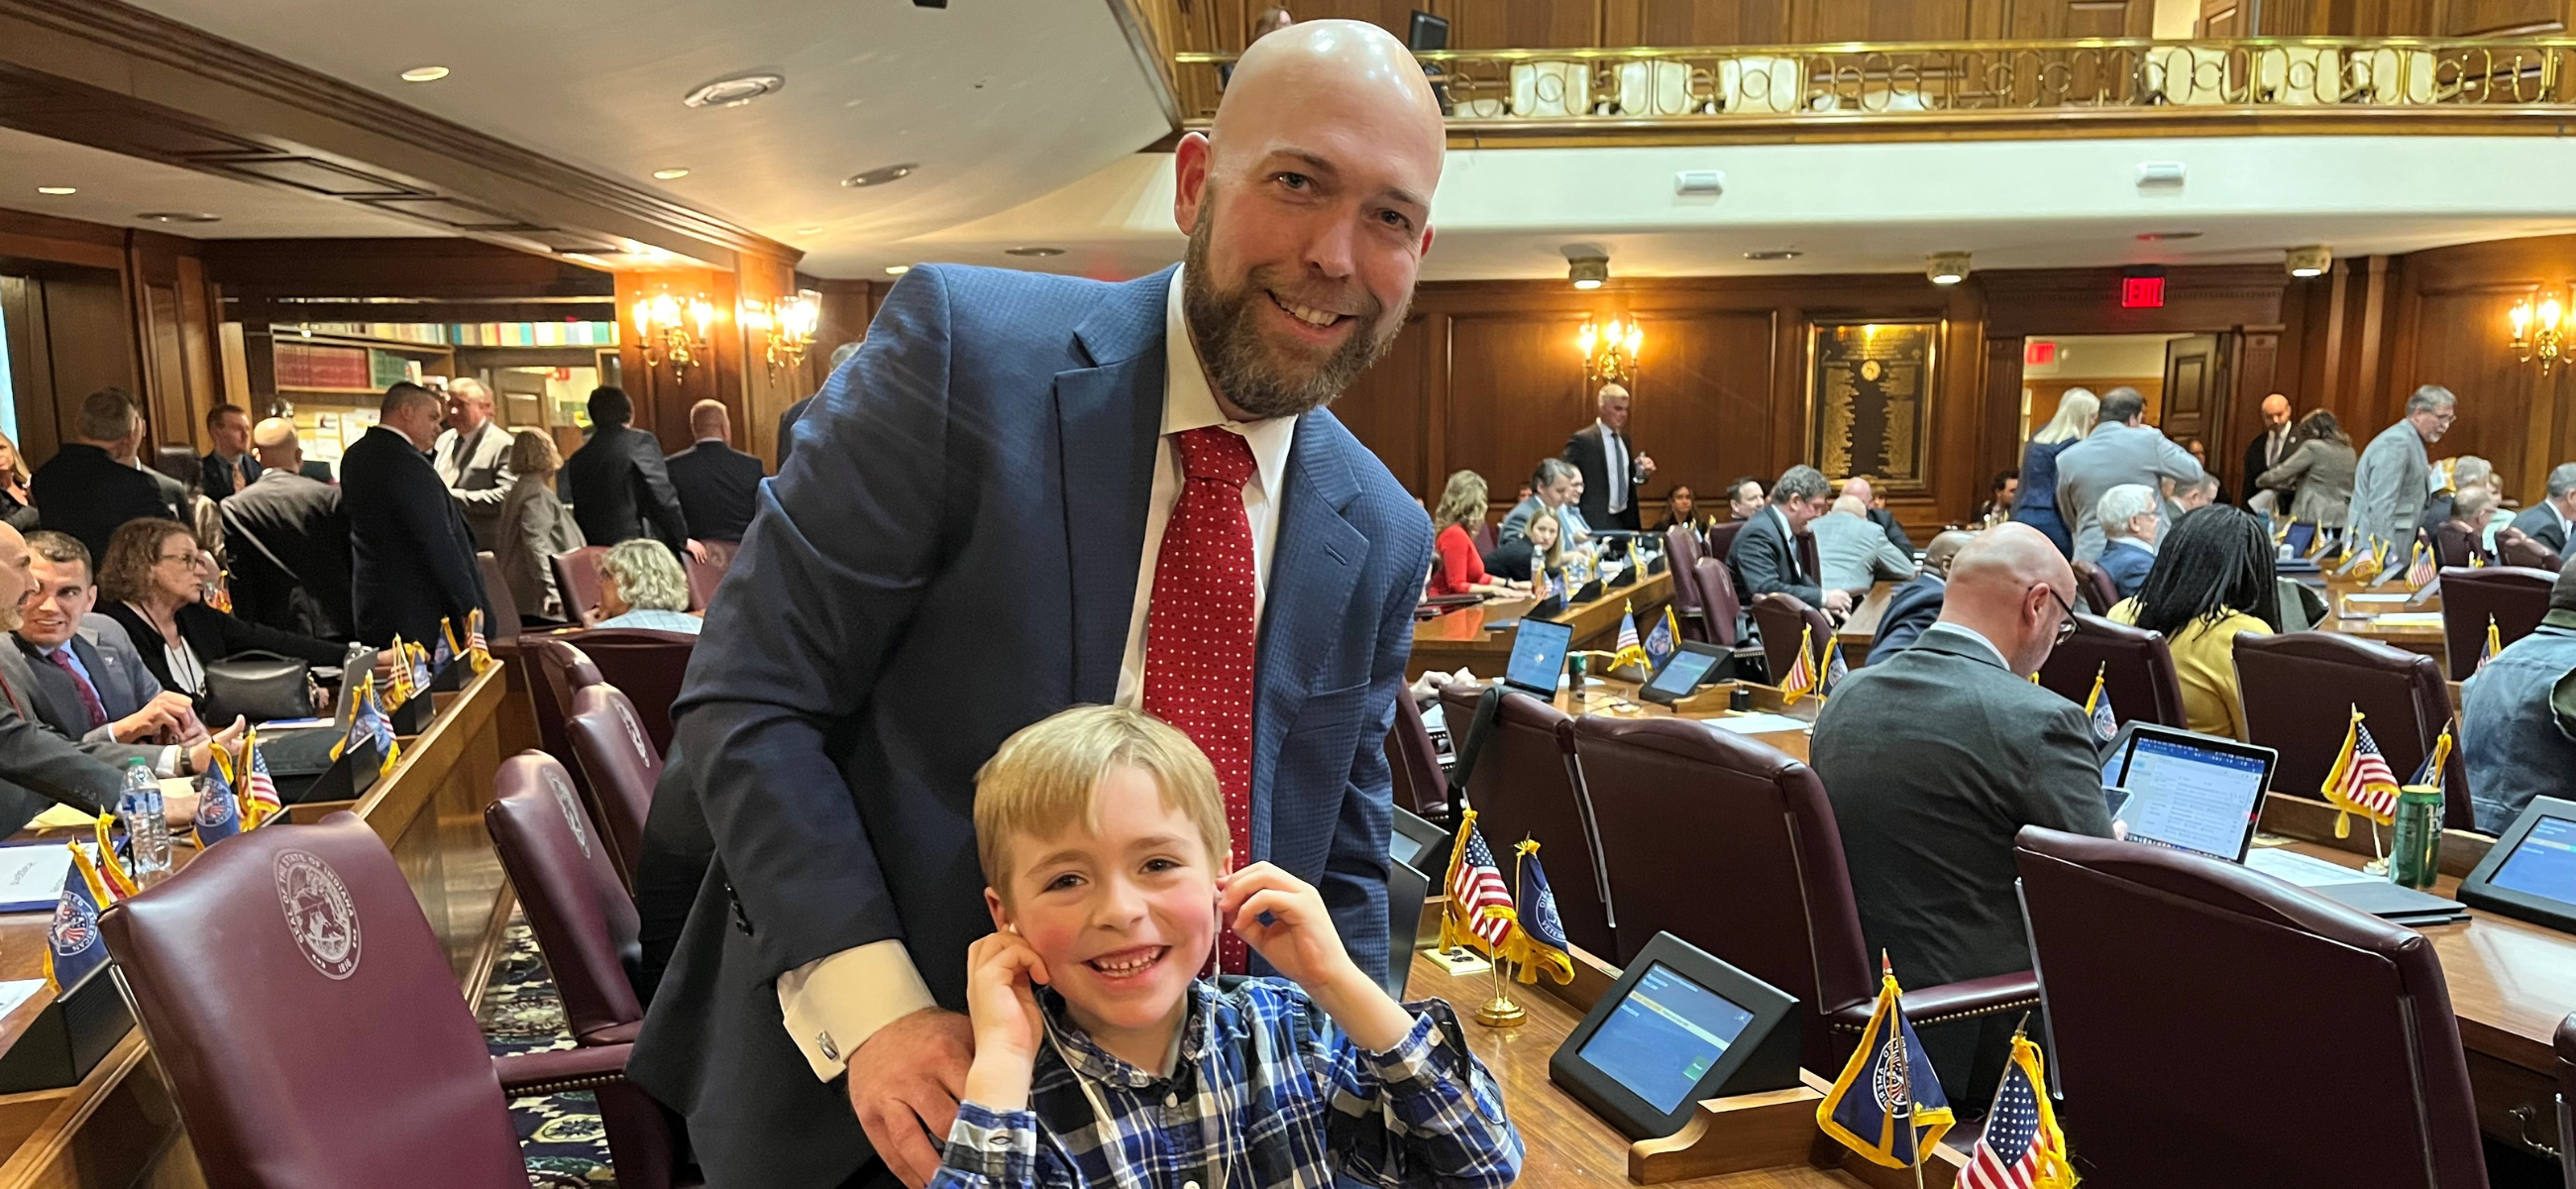 Rep. Robb Greene, R-Shelbyville, is pictured with his son, R.G., at the Indiana Statehouse. (Credit: Robb Greene)